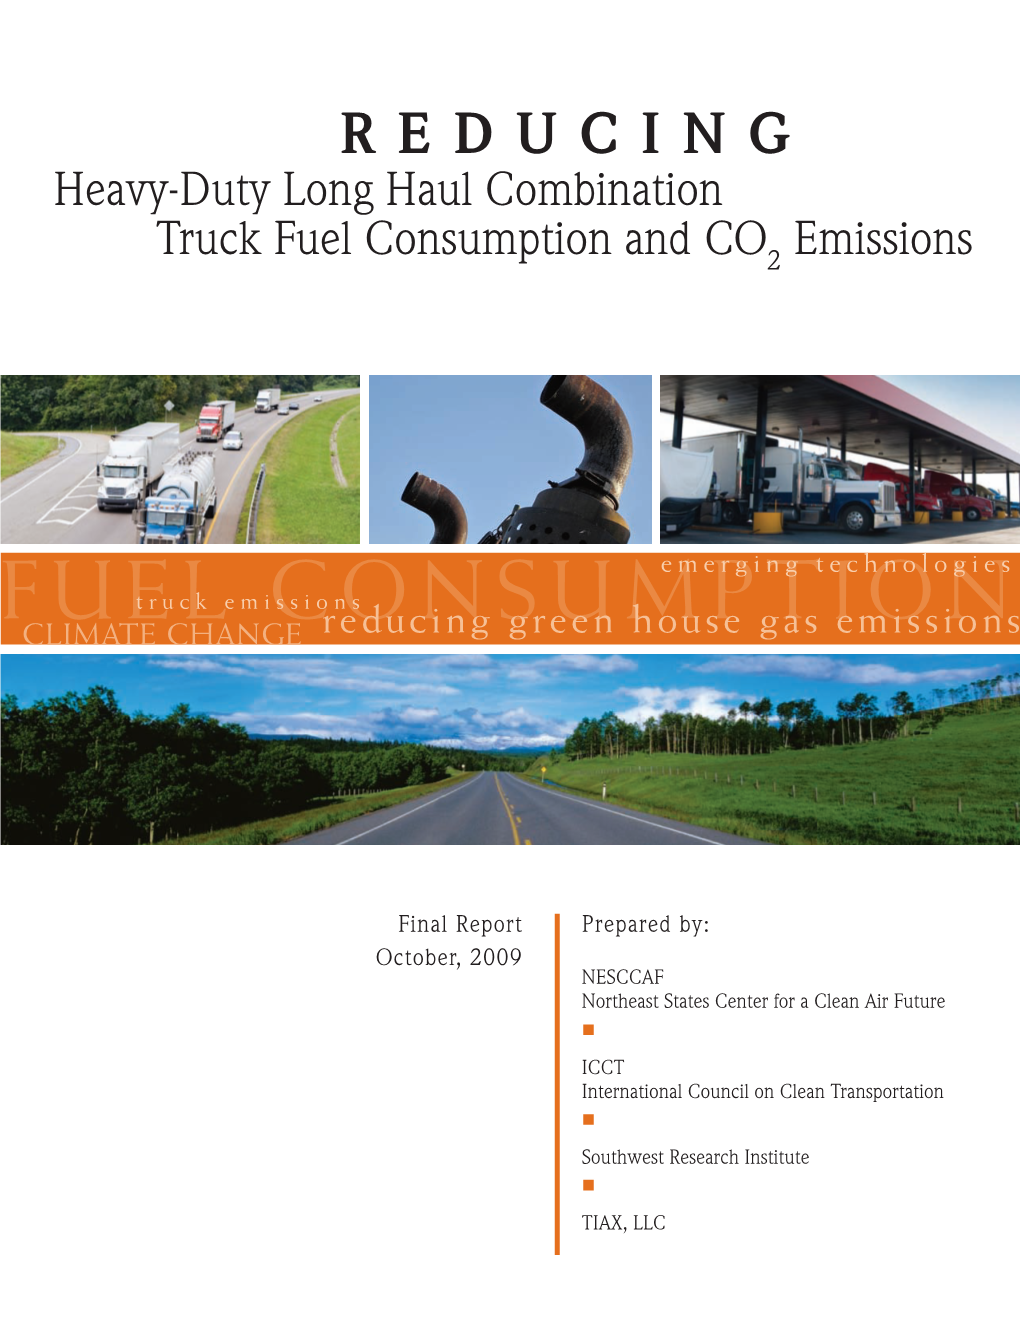 Heavy-Duty Long Haul Combination Truck Fuel Consumption and CO2 Emissions